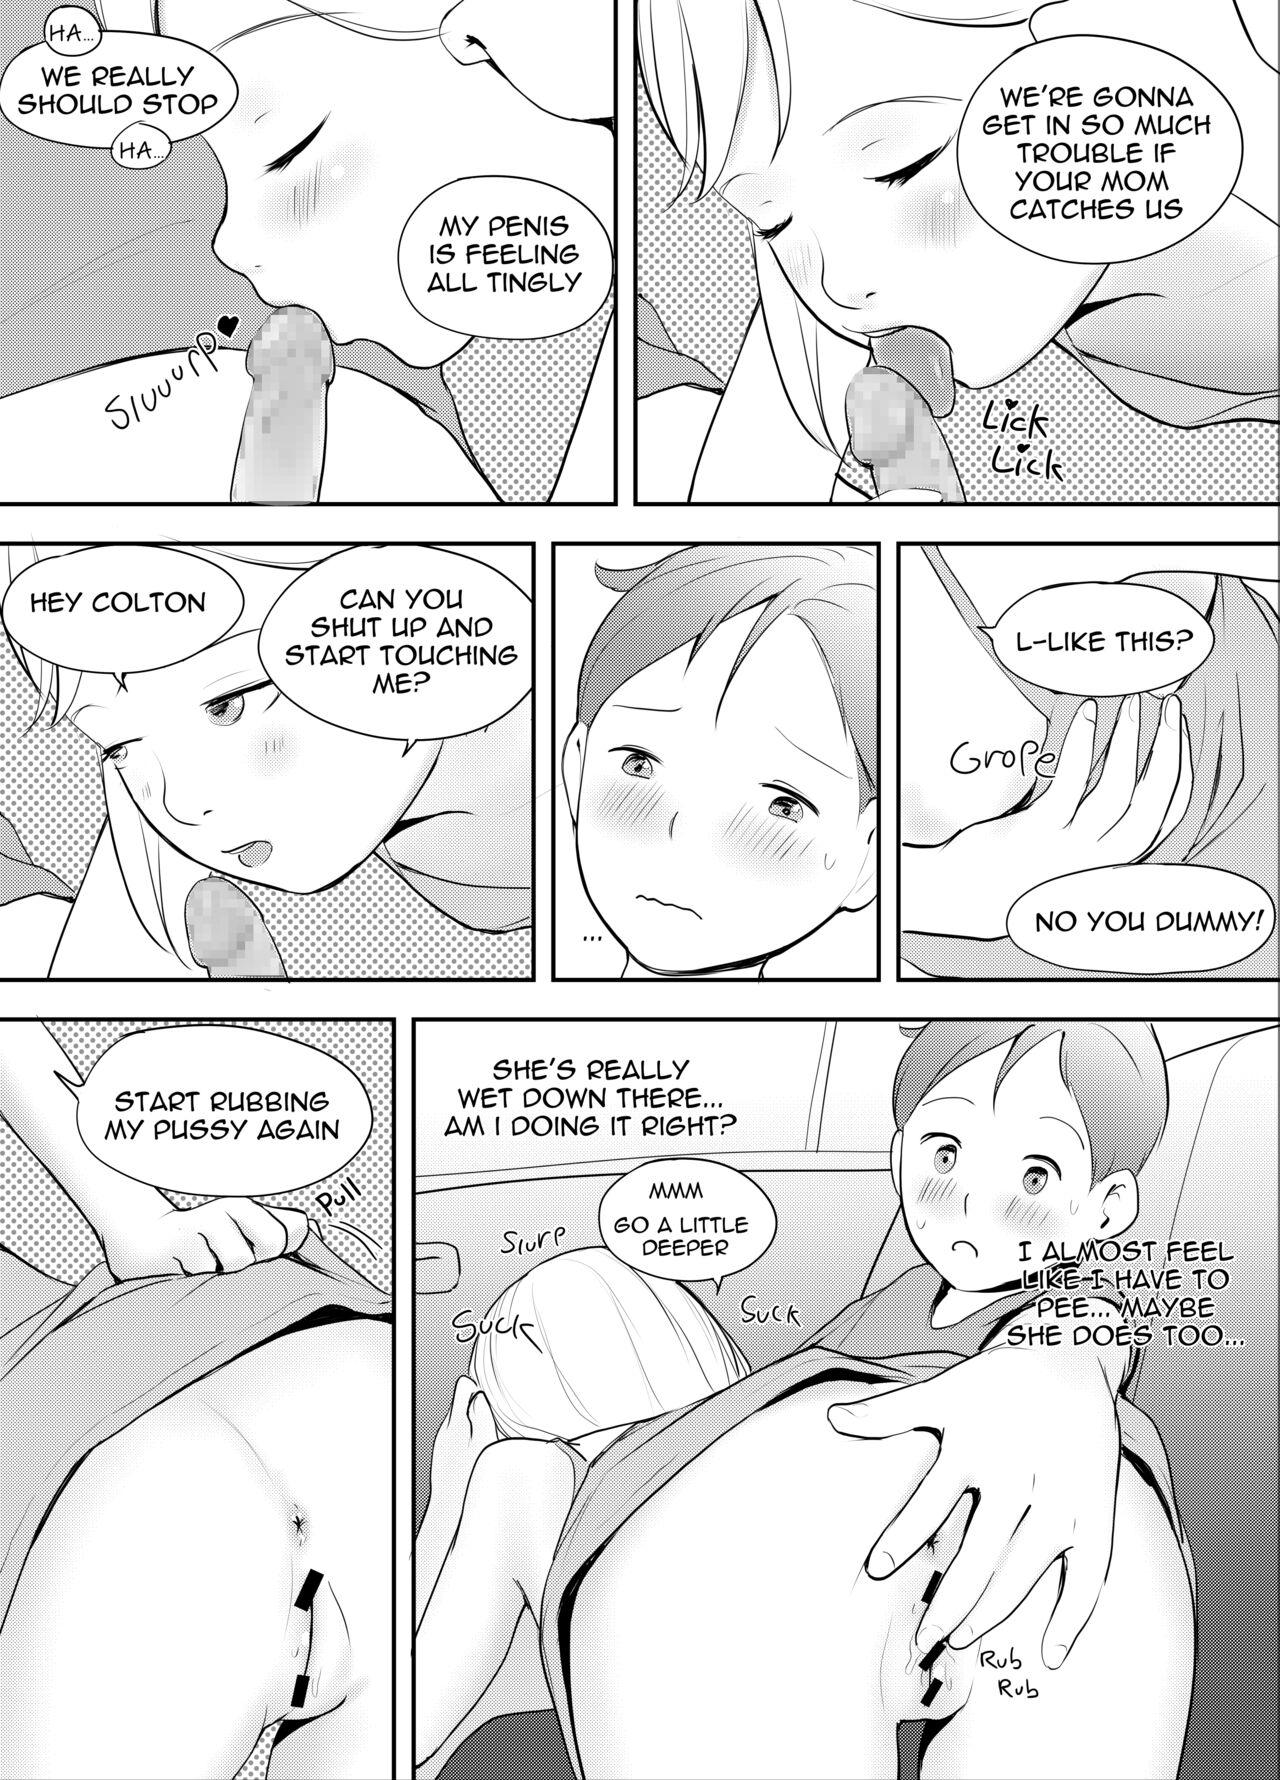 Shorts Passing the Time - Original Best Blow Jobs Ever - Page 10